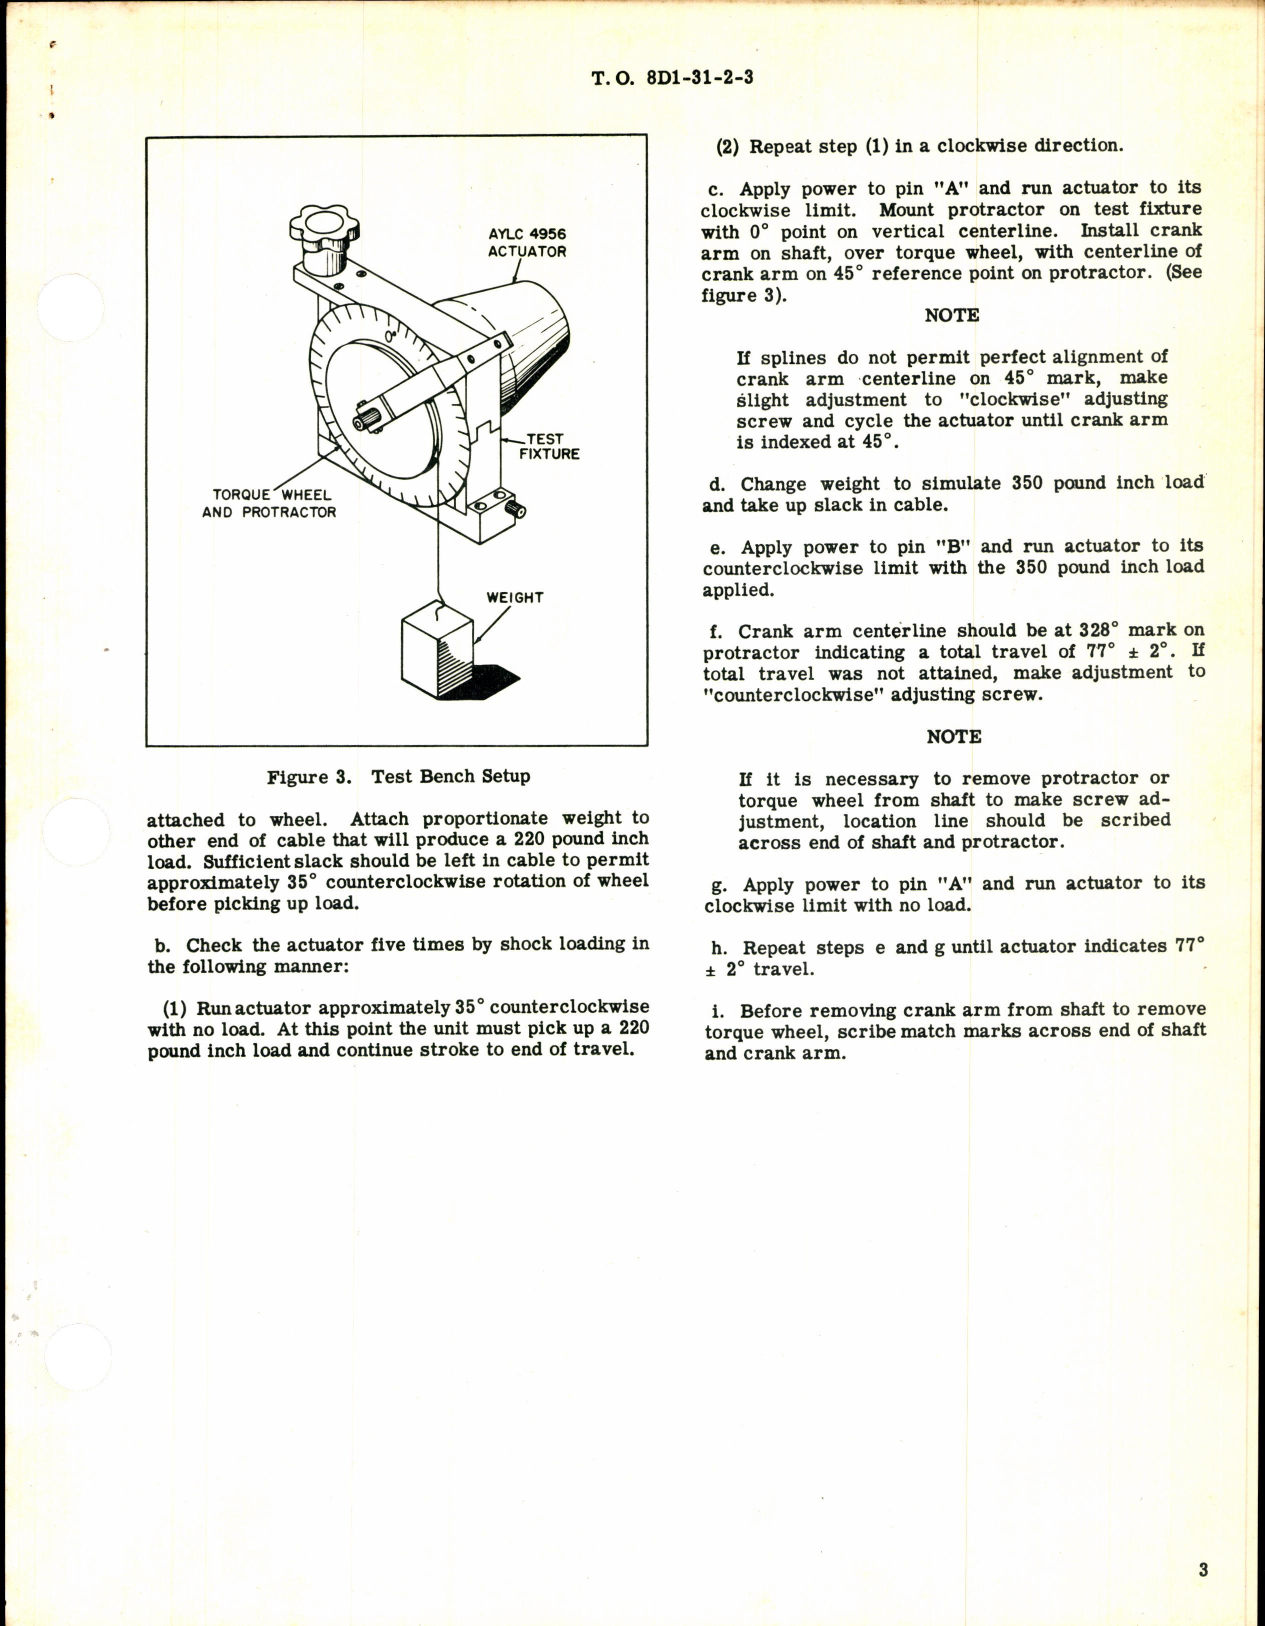 Sample page 3 from AirCorps Library document: Instructions w Parts Breakdown Rotary Actuator